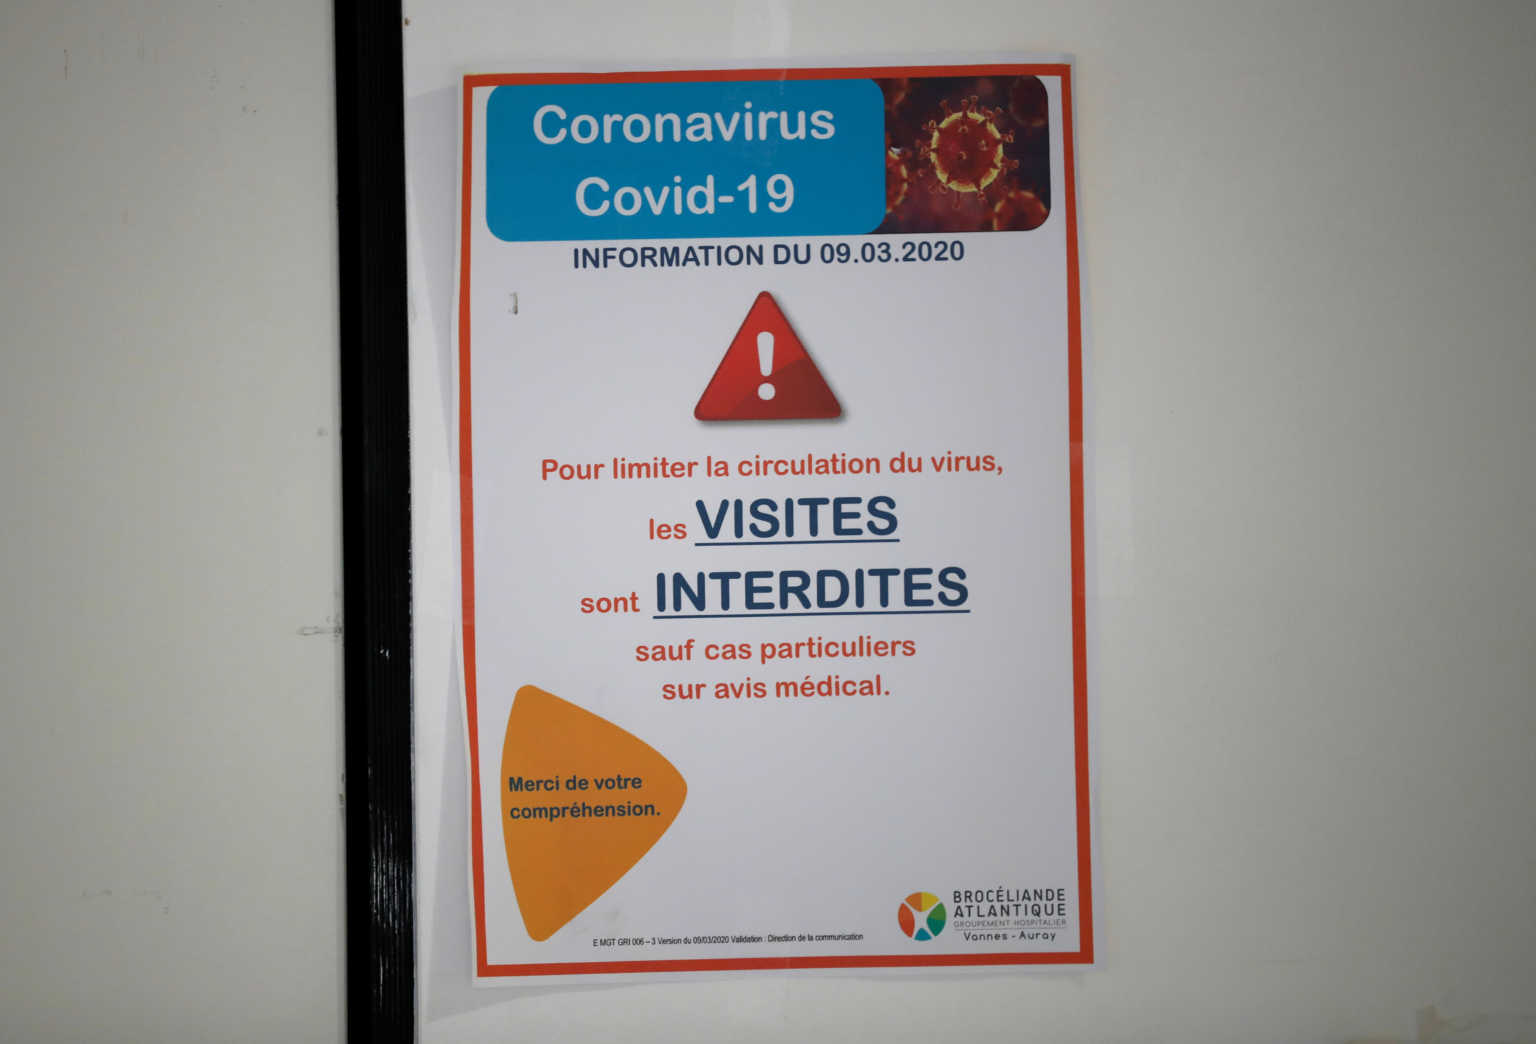 A no-access sign is seen on the door leading to the pulmonology unit at the hospital in Vannes where patients suffering from coronavirus disease (COVID-19) are treated, France, March 20, 2020. REUTERS/Stephane Mahe